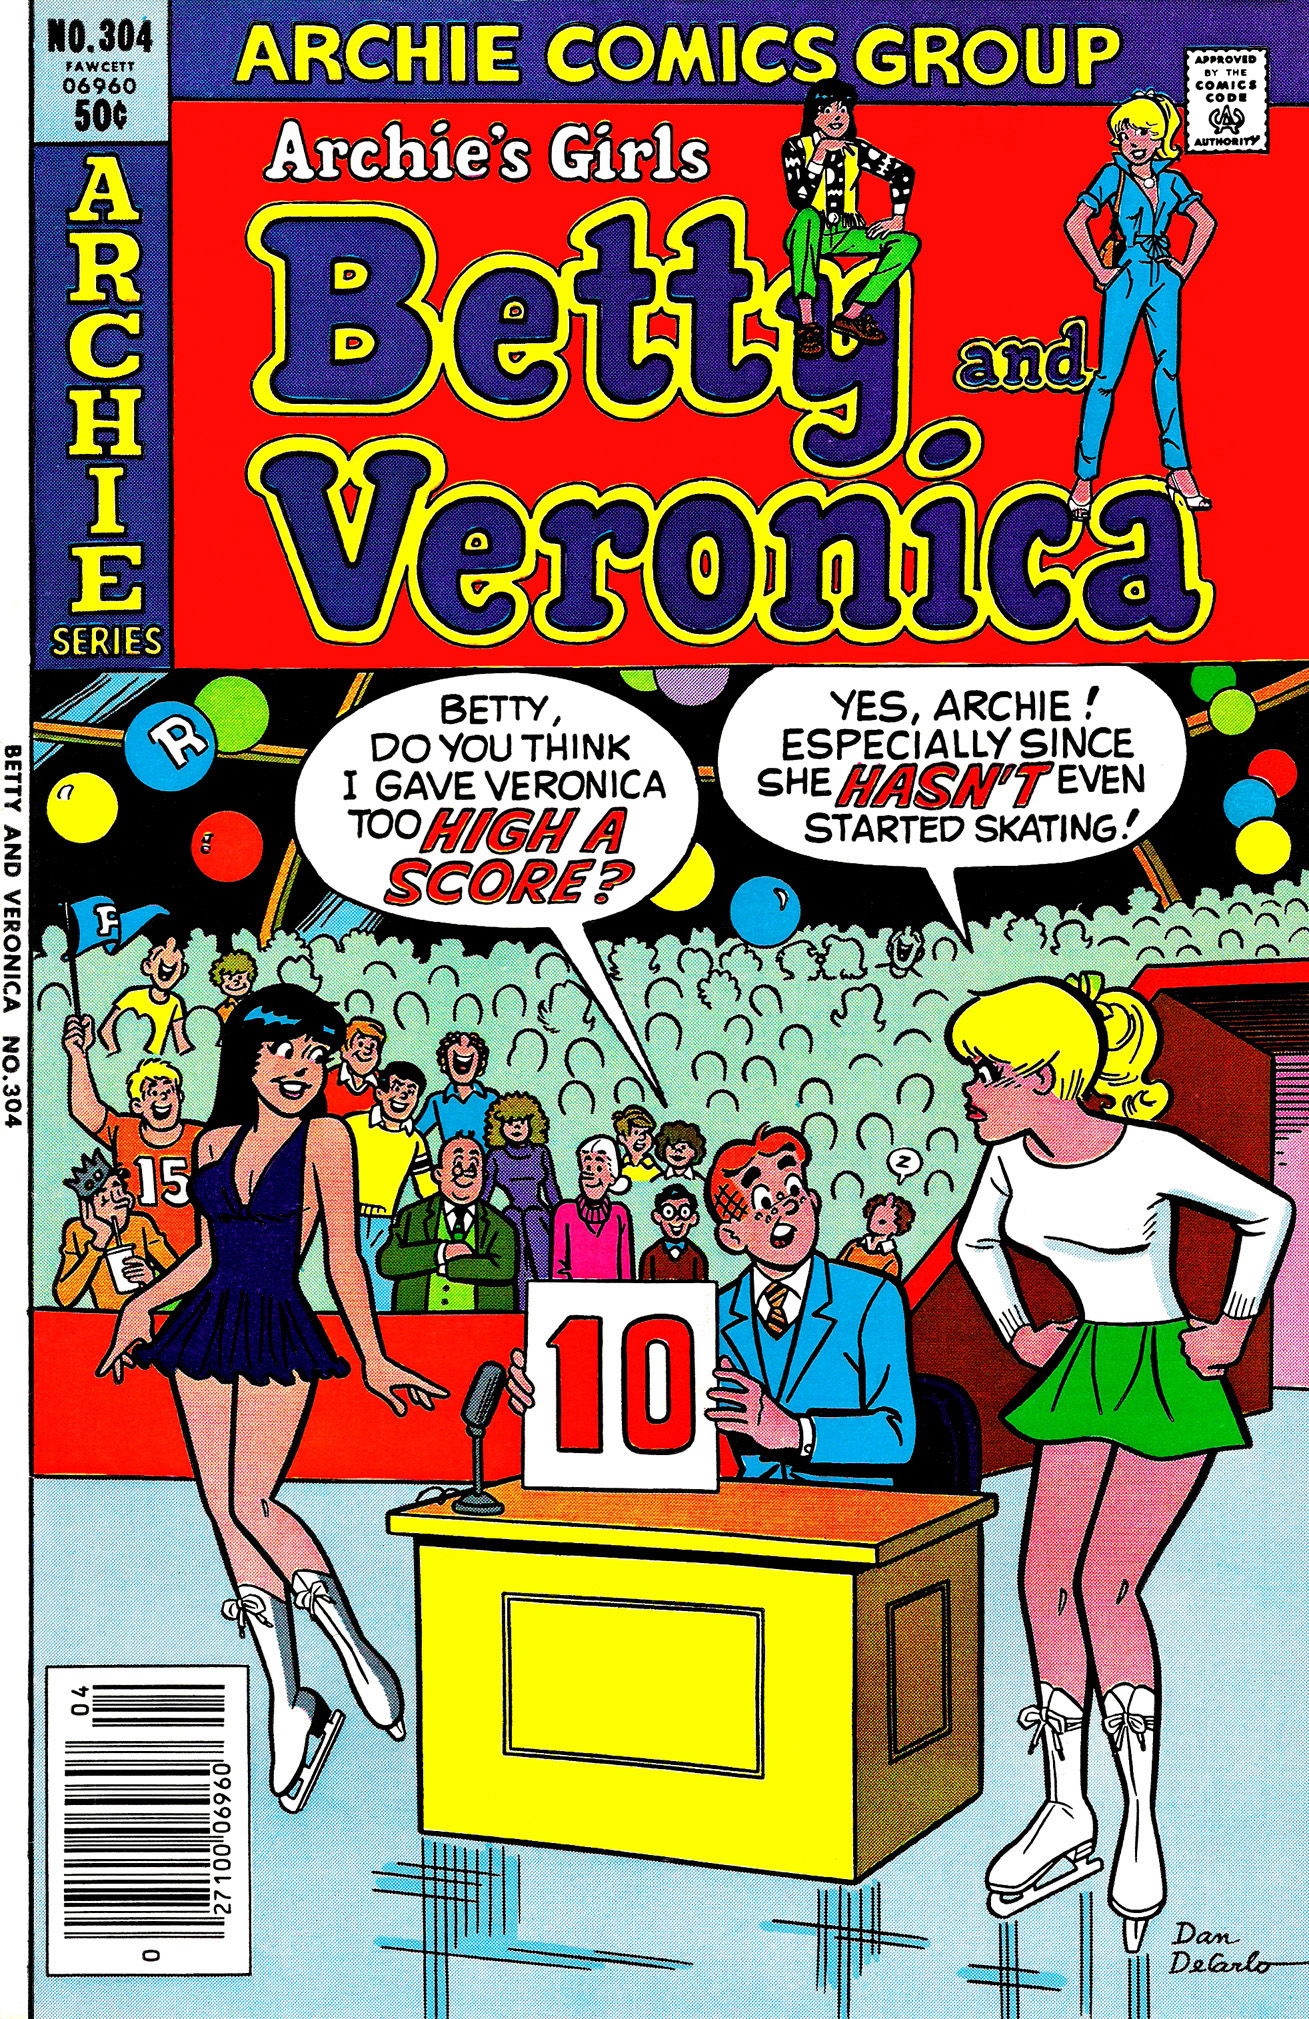 Read online Archie's Girls Betty and Veronica comic -  Issue #304 - 1